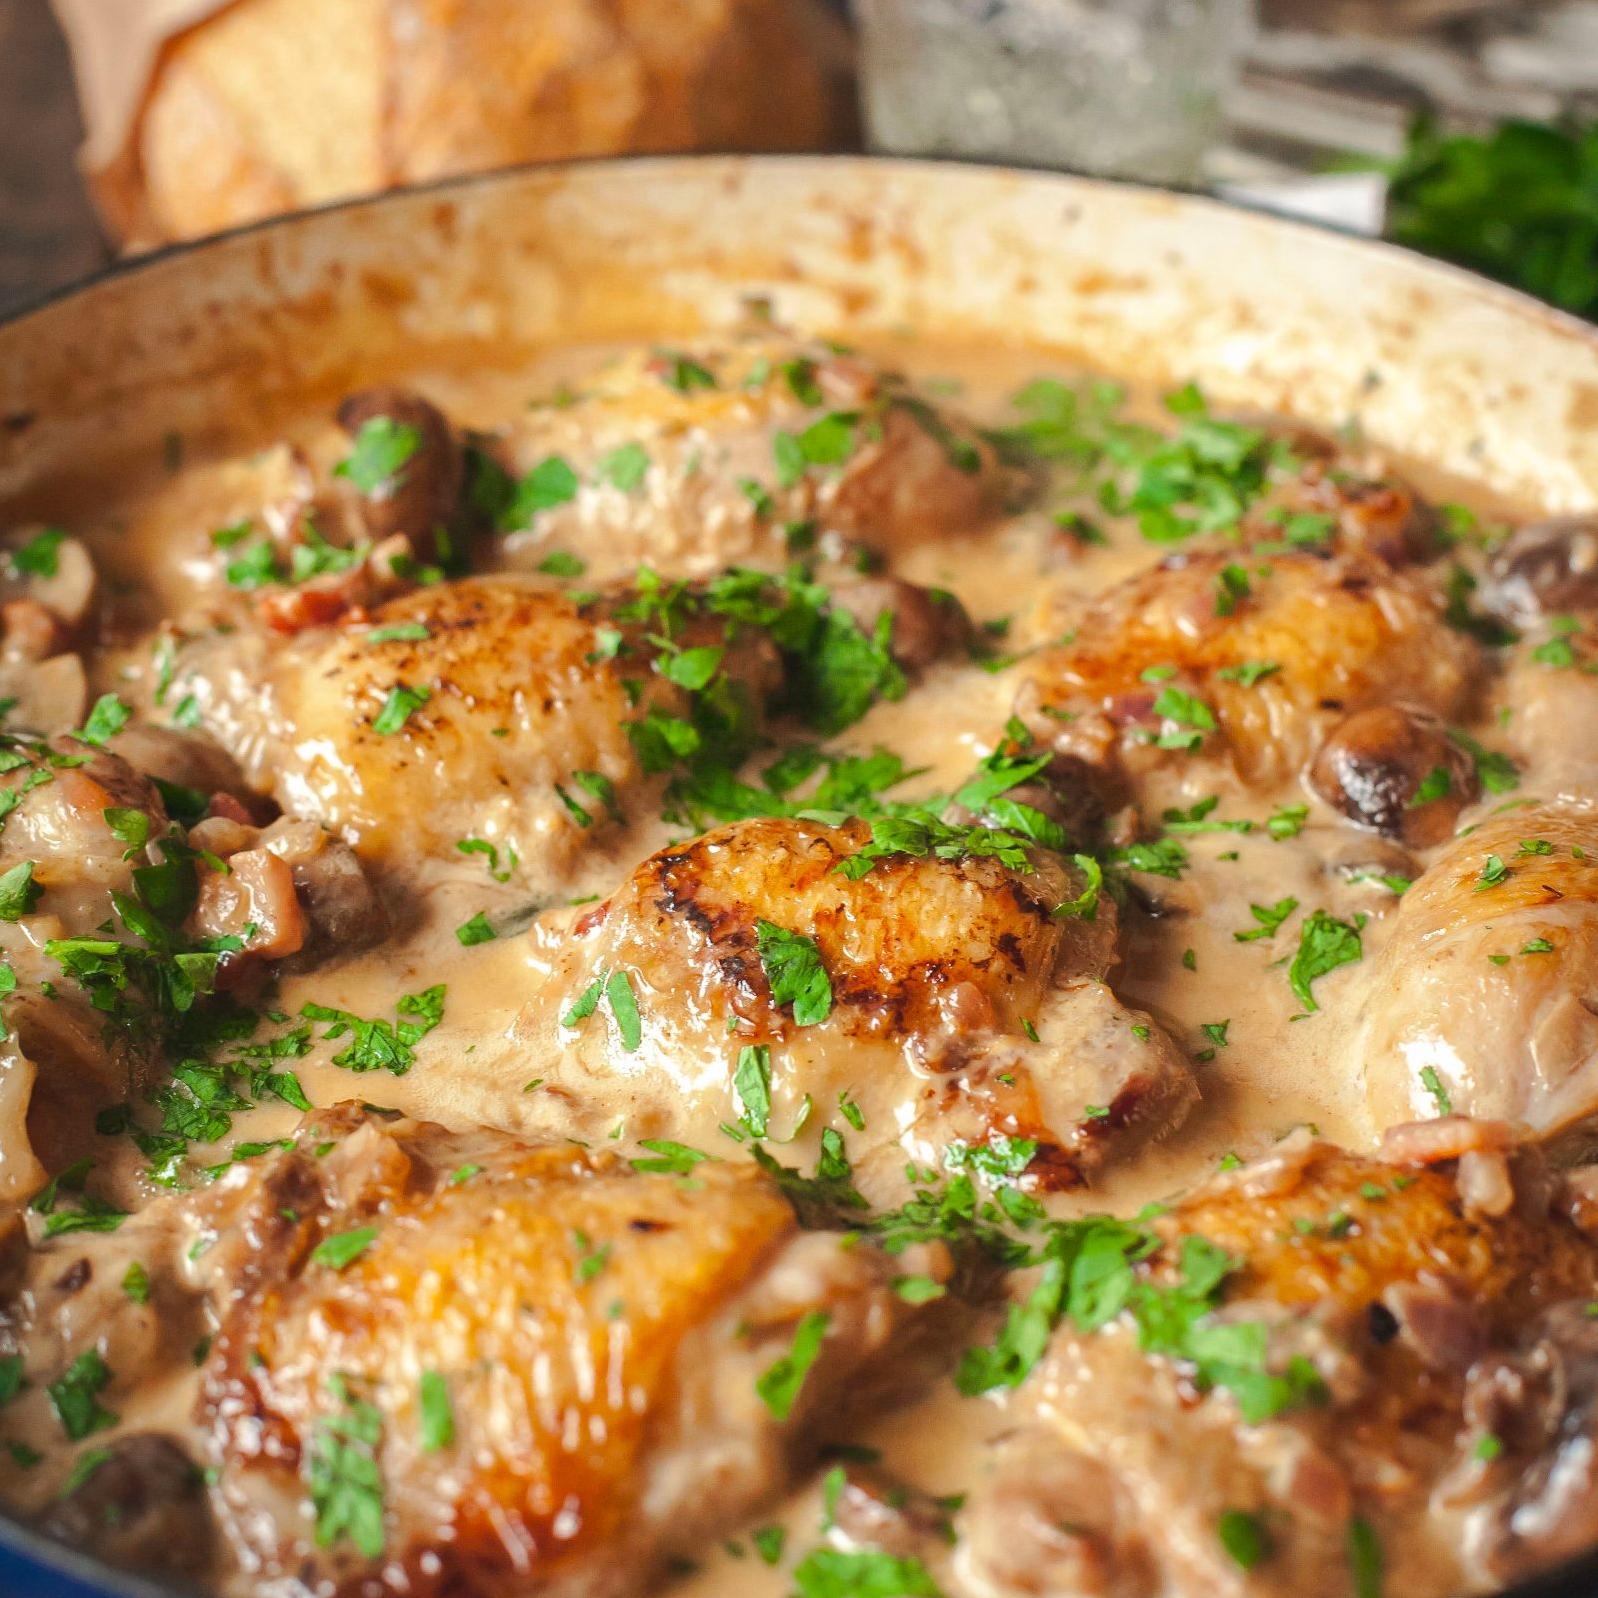  In this recipe, the chicken is cooked slowly in white wine and broth, creating a fork-tender texture.